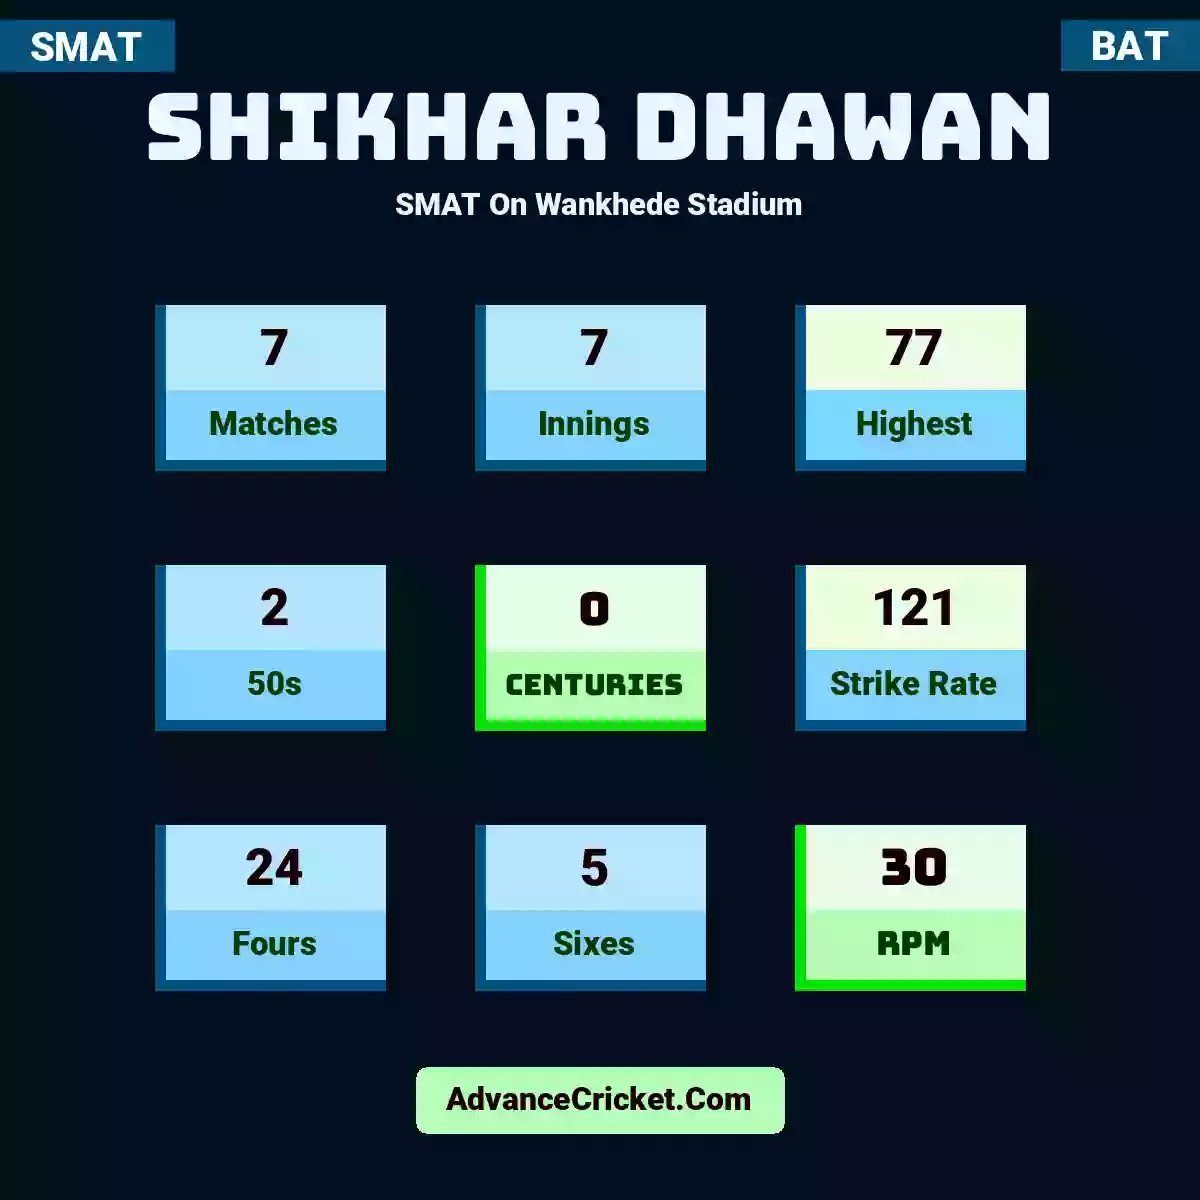 Shikhar Dhawan SMAT  On Wankhede Stadium, Shikhar Dhawan played 7 matches, scored 77 runs as highest, 2 half-centuries, and 0 centuries, with a strike rate of 121. S.Dhawan hit 24 fours and 5 sixes, with an RPM of 30.